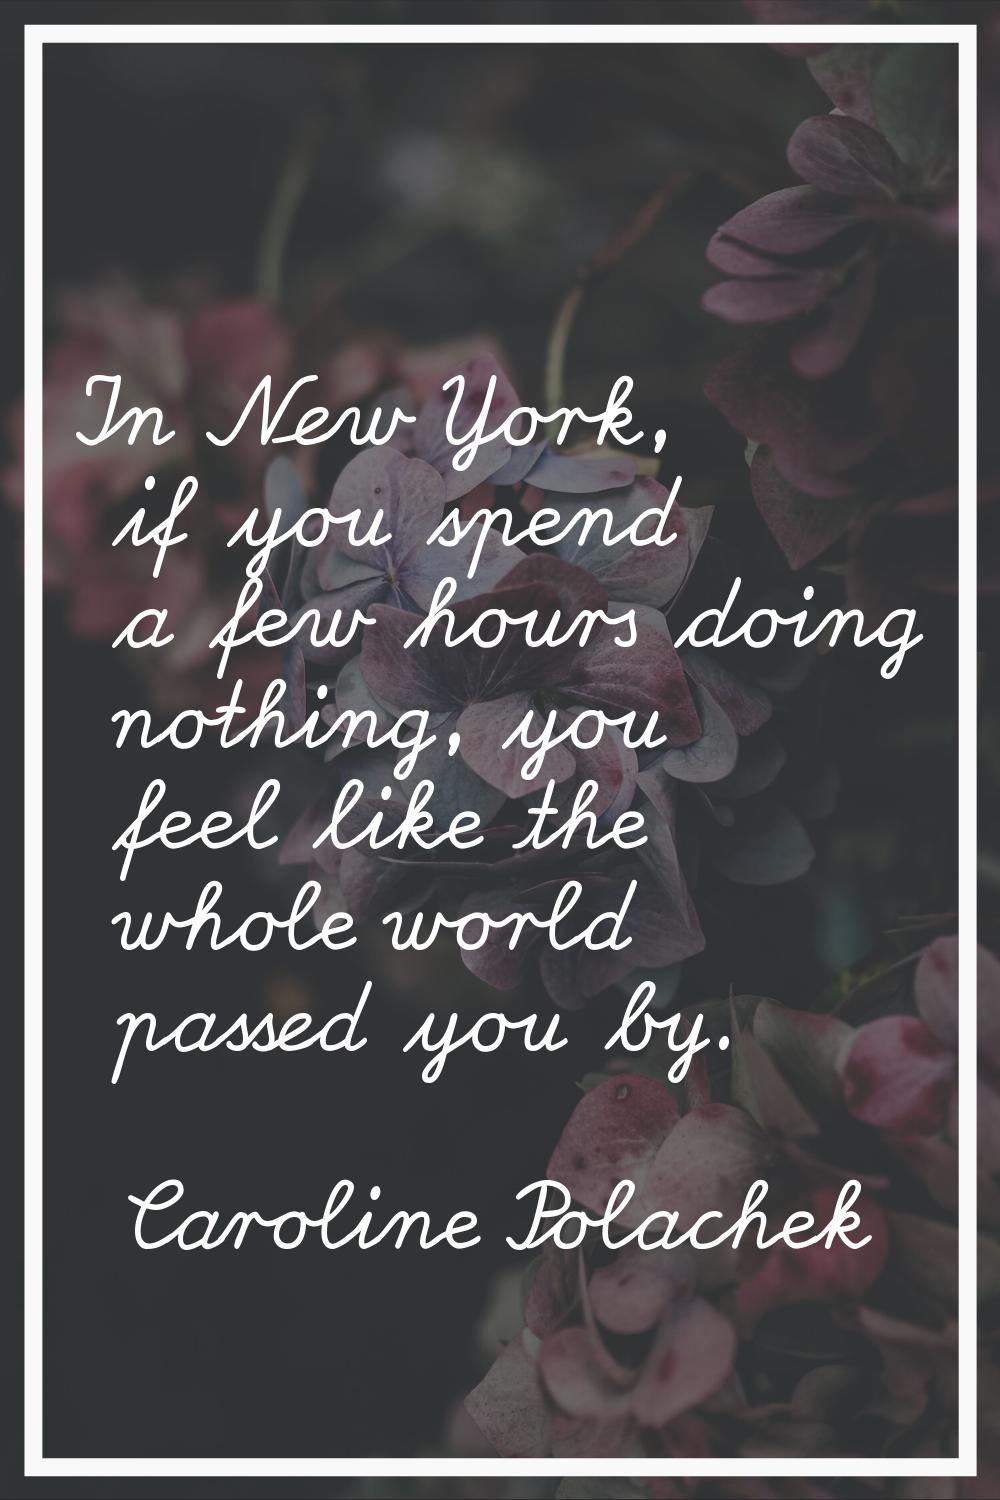 In New York, if you spend a few hours doing nothing, you feel like the whole world passed you by.